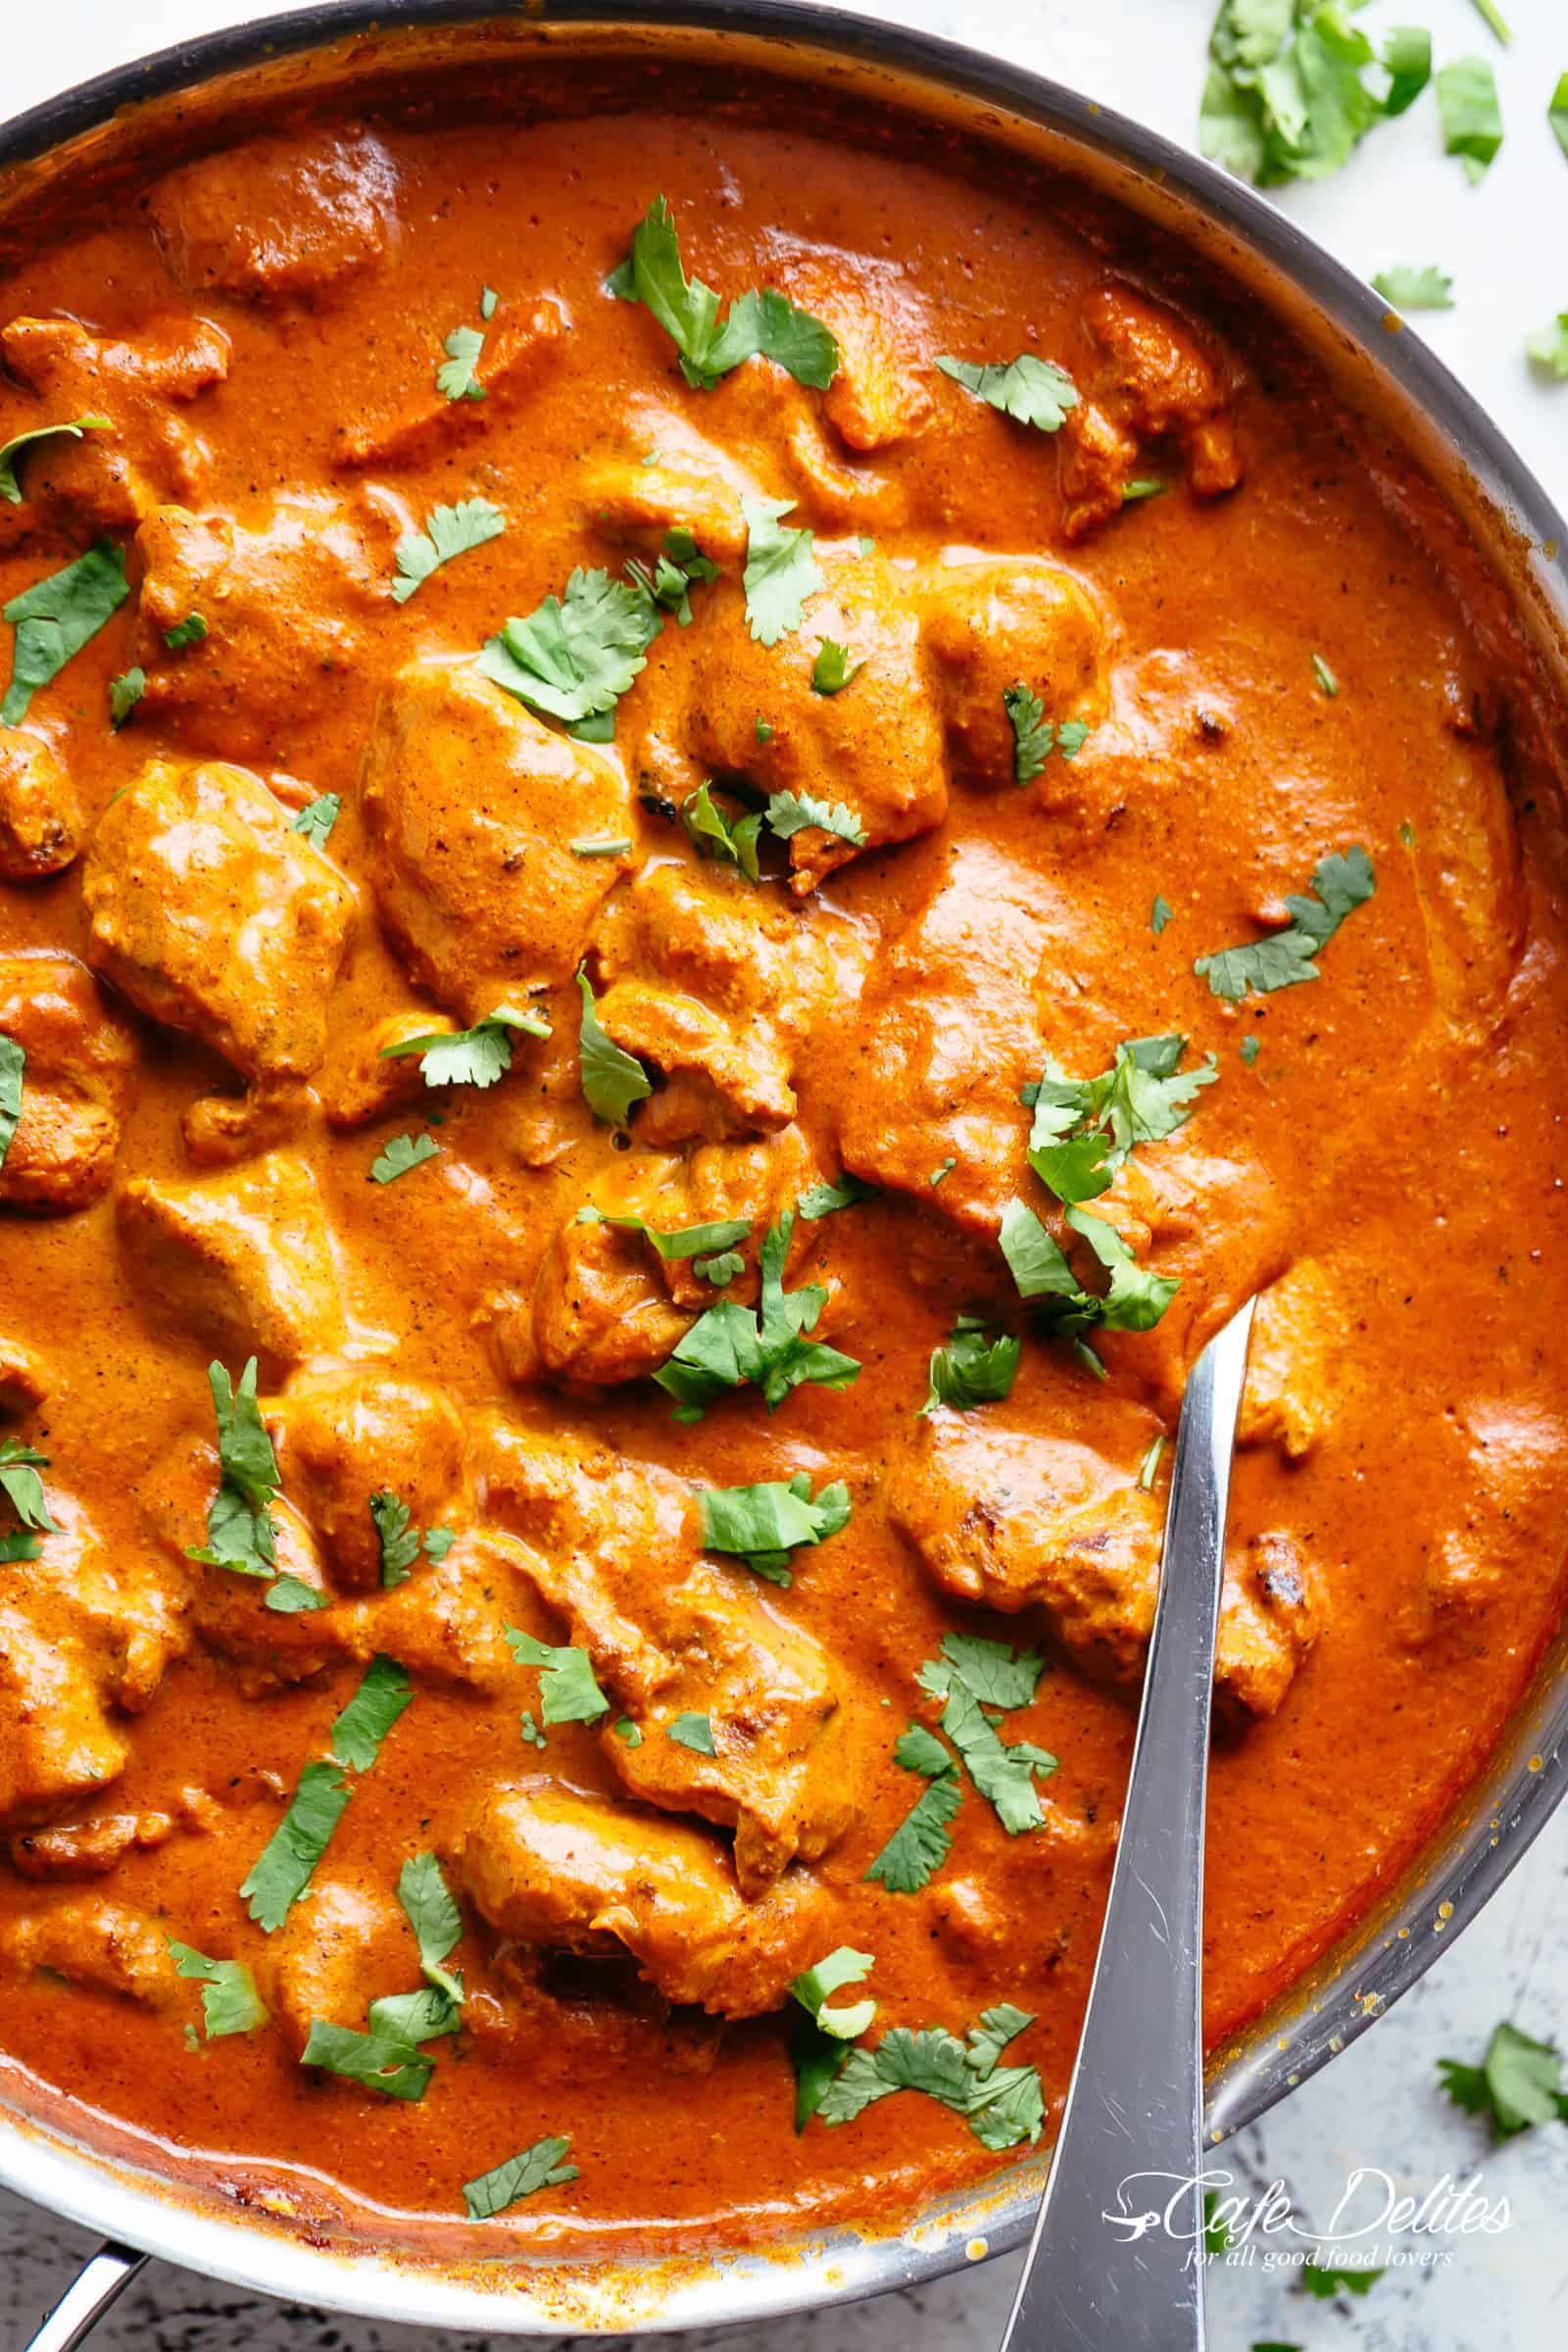 Chicken Tikka Masala is creamy and easy to make right at home in one pan with simple ingredients!Full of incredible flavours, it rivals any Indian restaurant! Aromatic golden chicken pieces in an incredible creamy curry sauce, this Chicken Tikka Masala recipe is one of the best you will try! | cafedelites.com